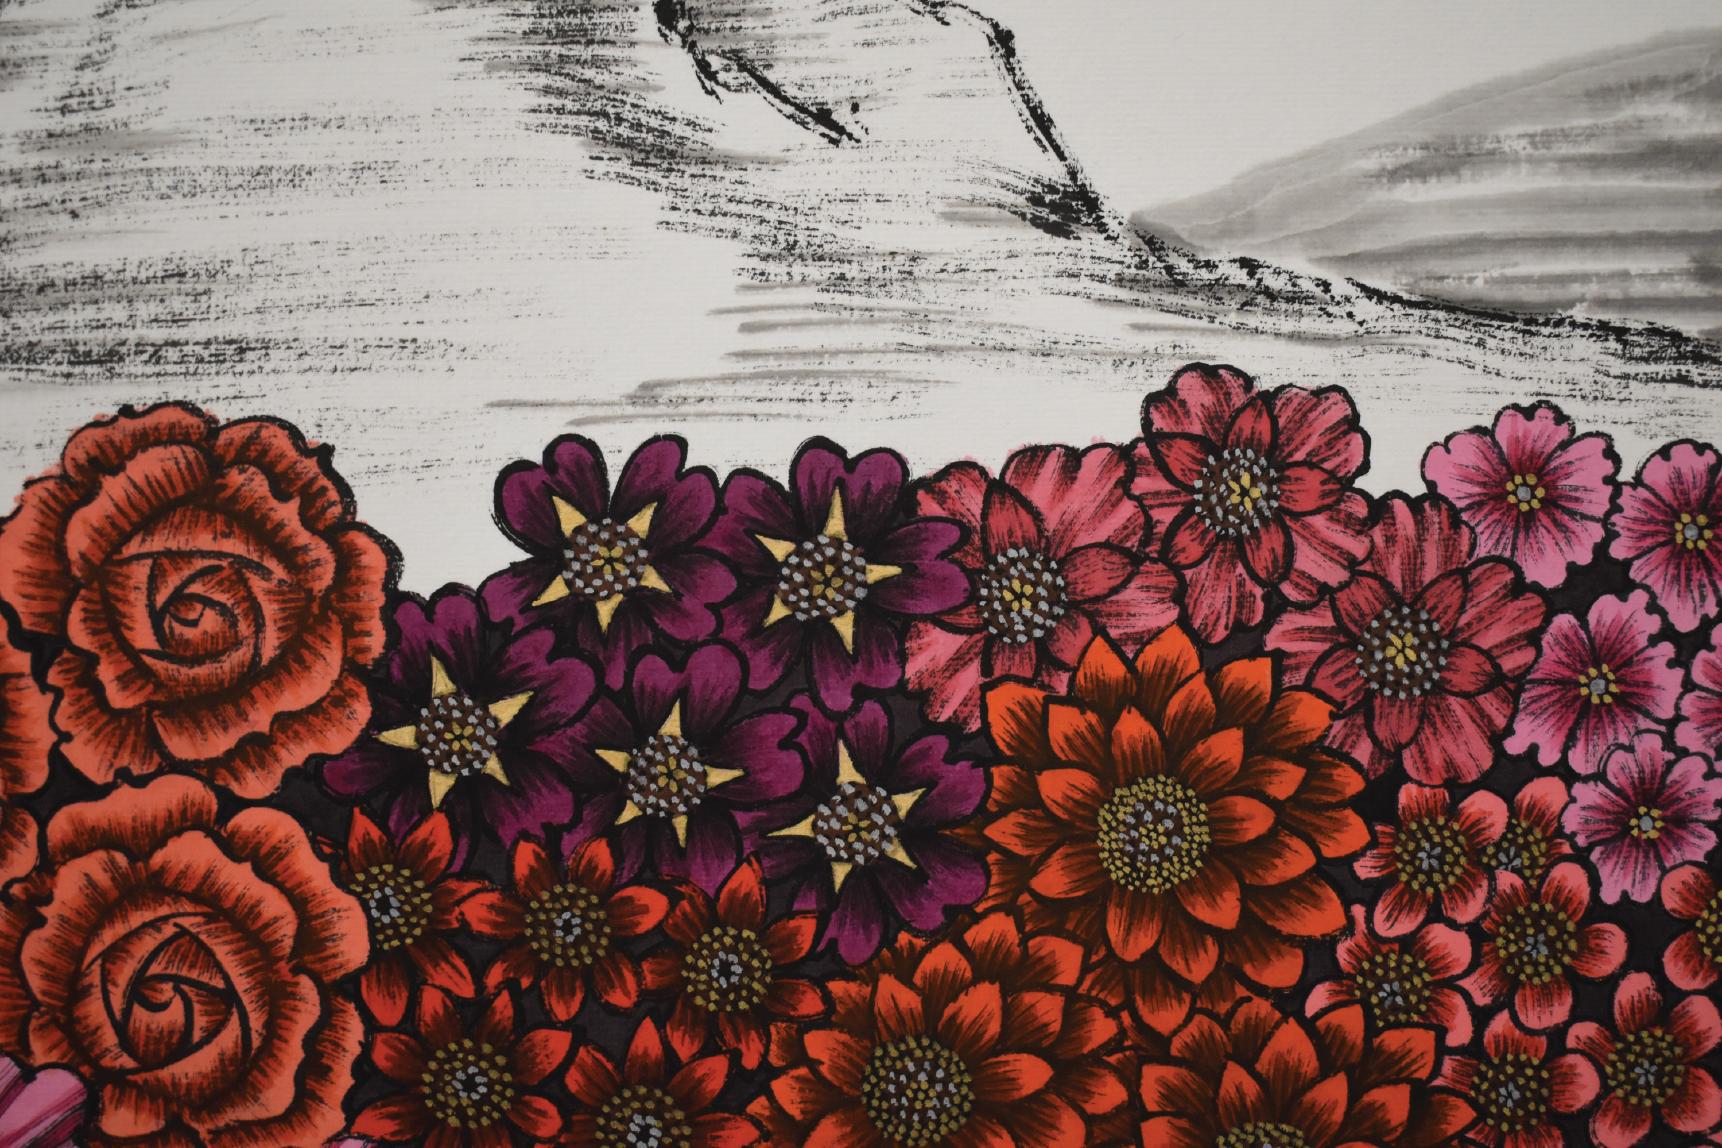 Floating Red Flowers In Surrealistic Landscape. Chinese Ink In Modern Era. - Painting by Kium